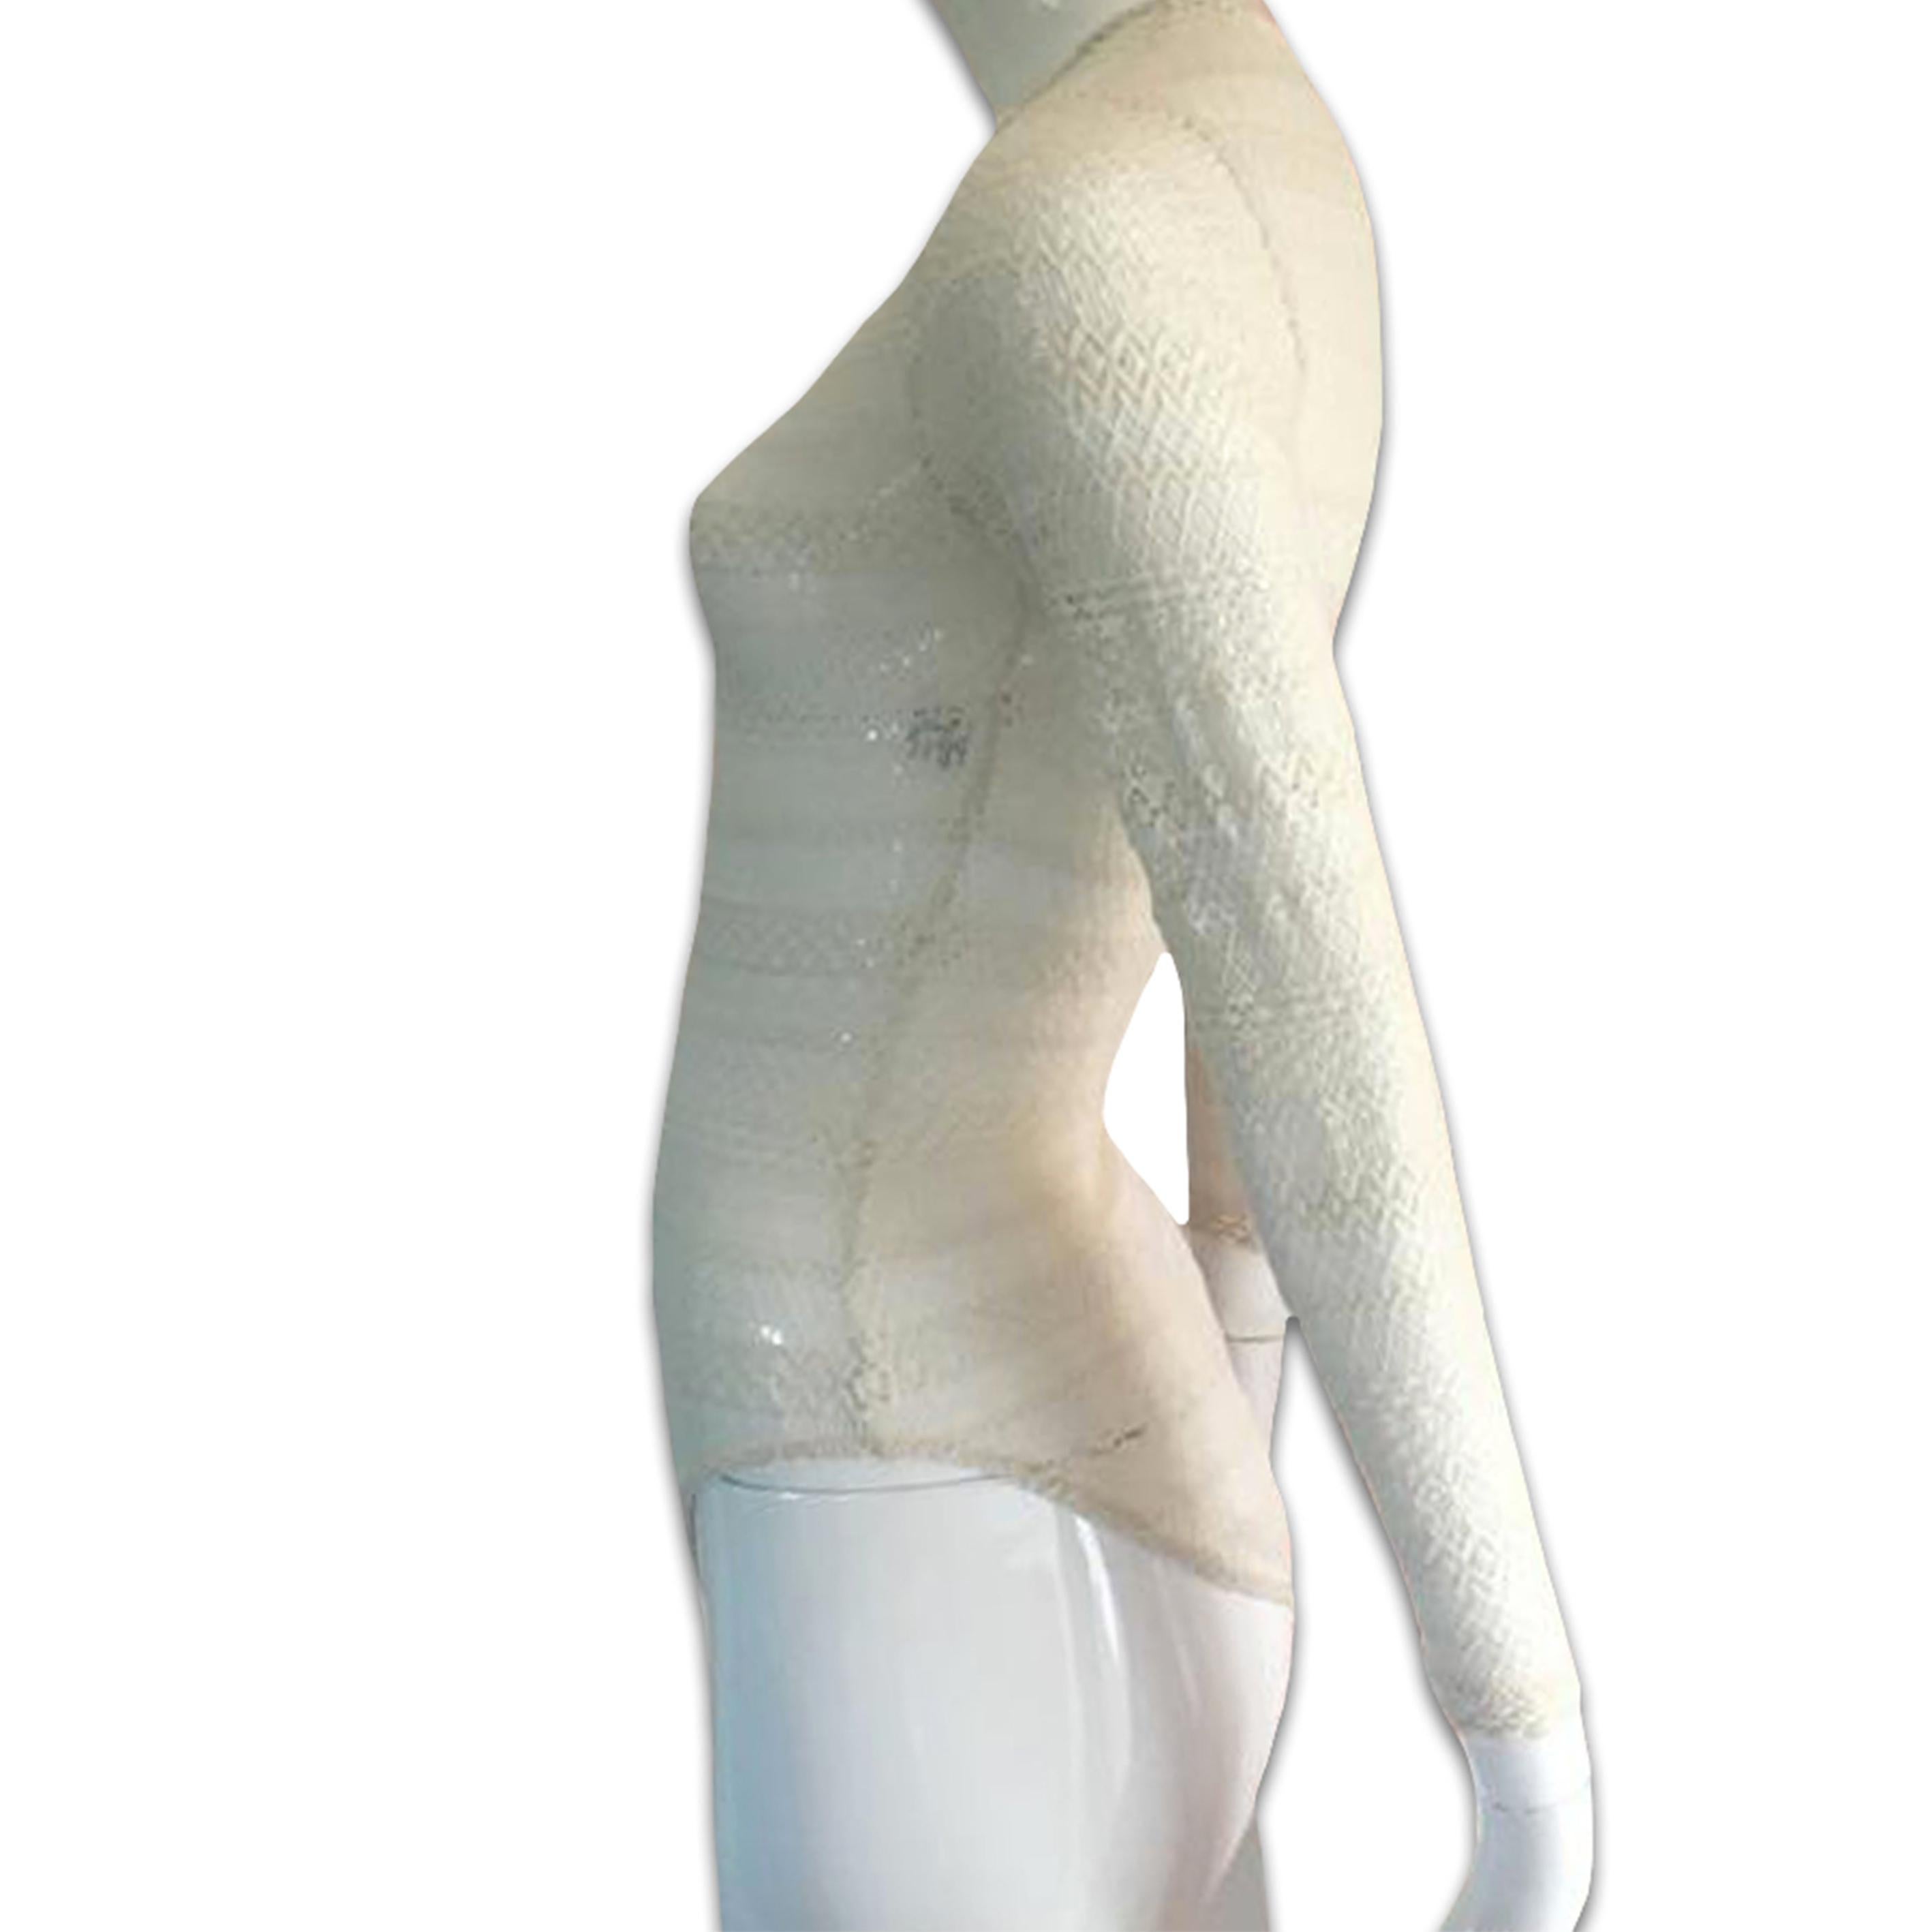 CHANTAL THOMASS SS1995 Cream bodysuit

Tag: THOMASS

Size S/M

Measurements

Shoulder: 14,17 inches / 36cm

Chest: 15,35 inches / 39cm

Length: 25,98 inches / 66cm

Material

87% polyamide/ 13% nylon

Zip on the back

Perfect condition !!

Shipping